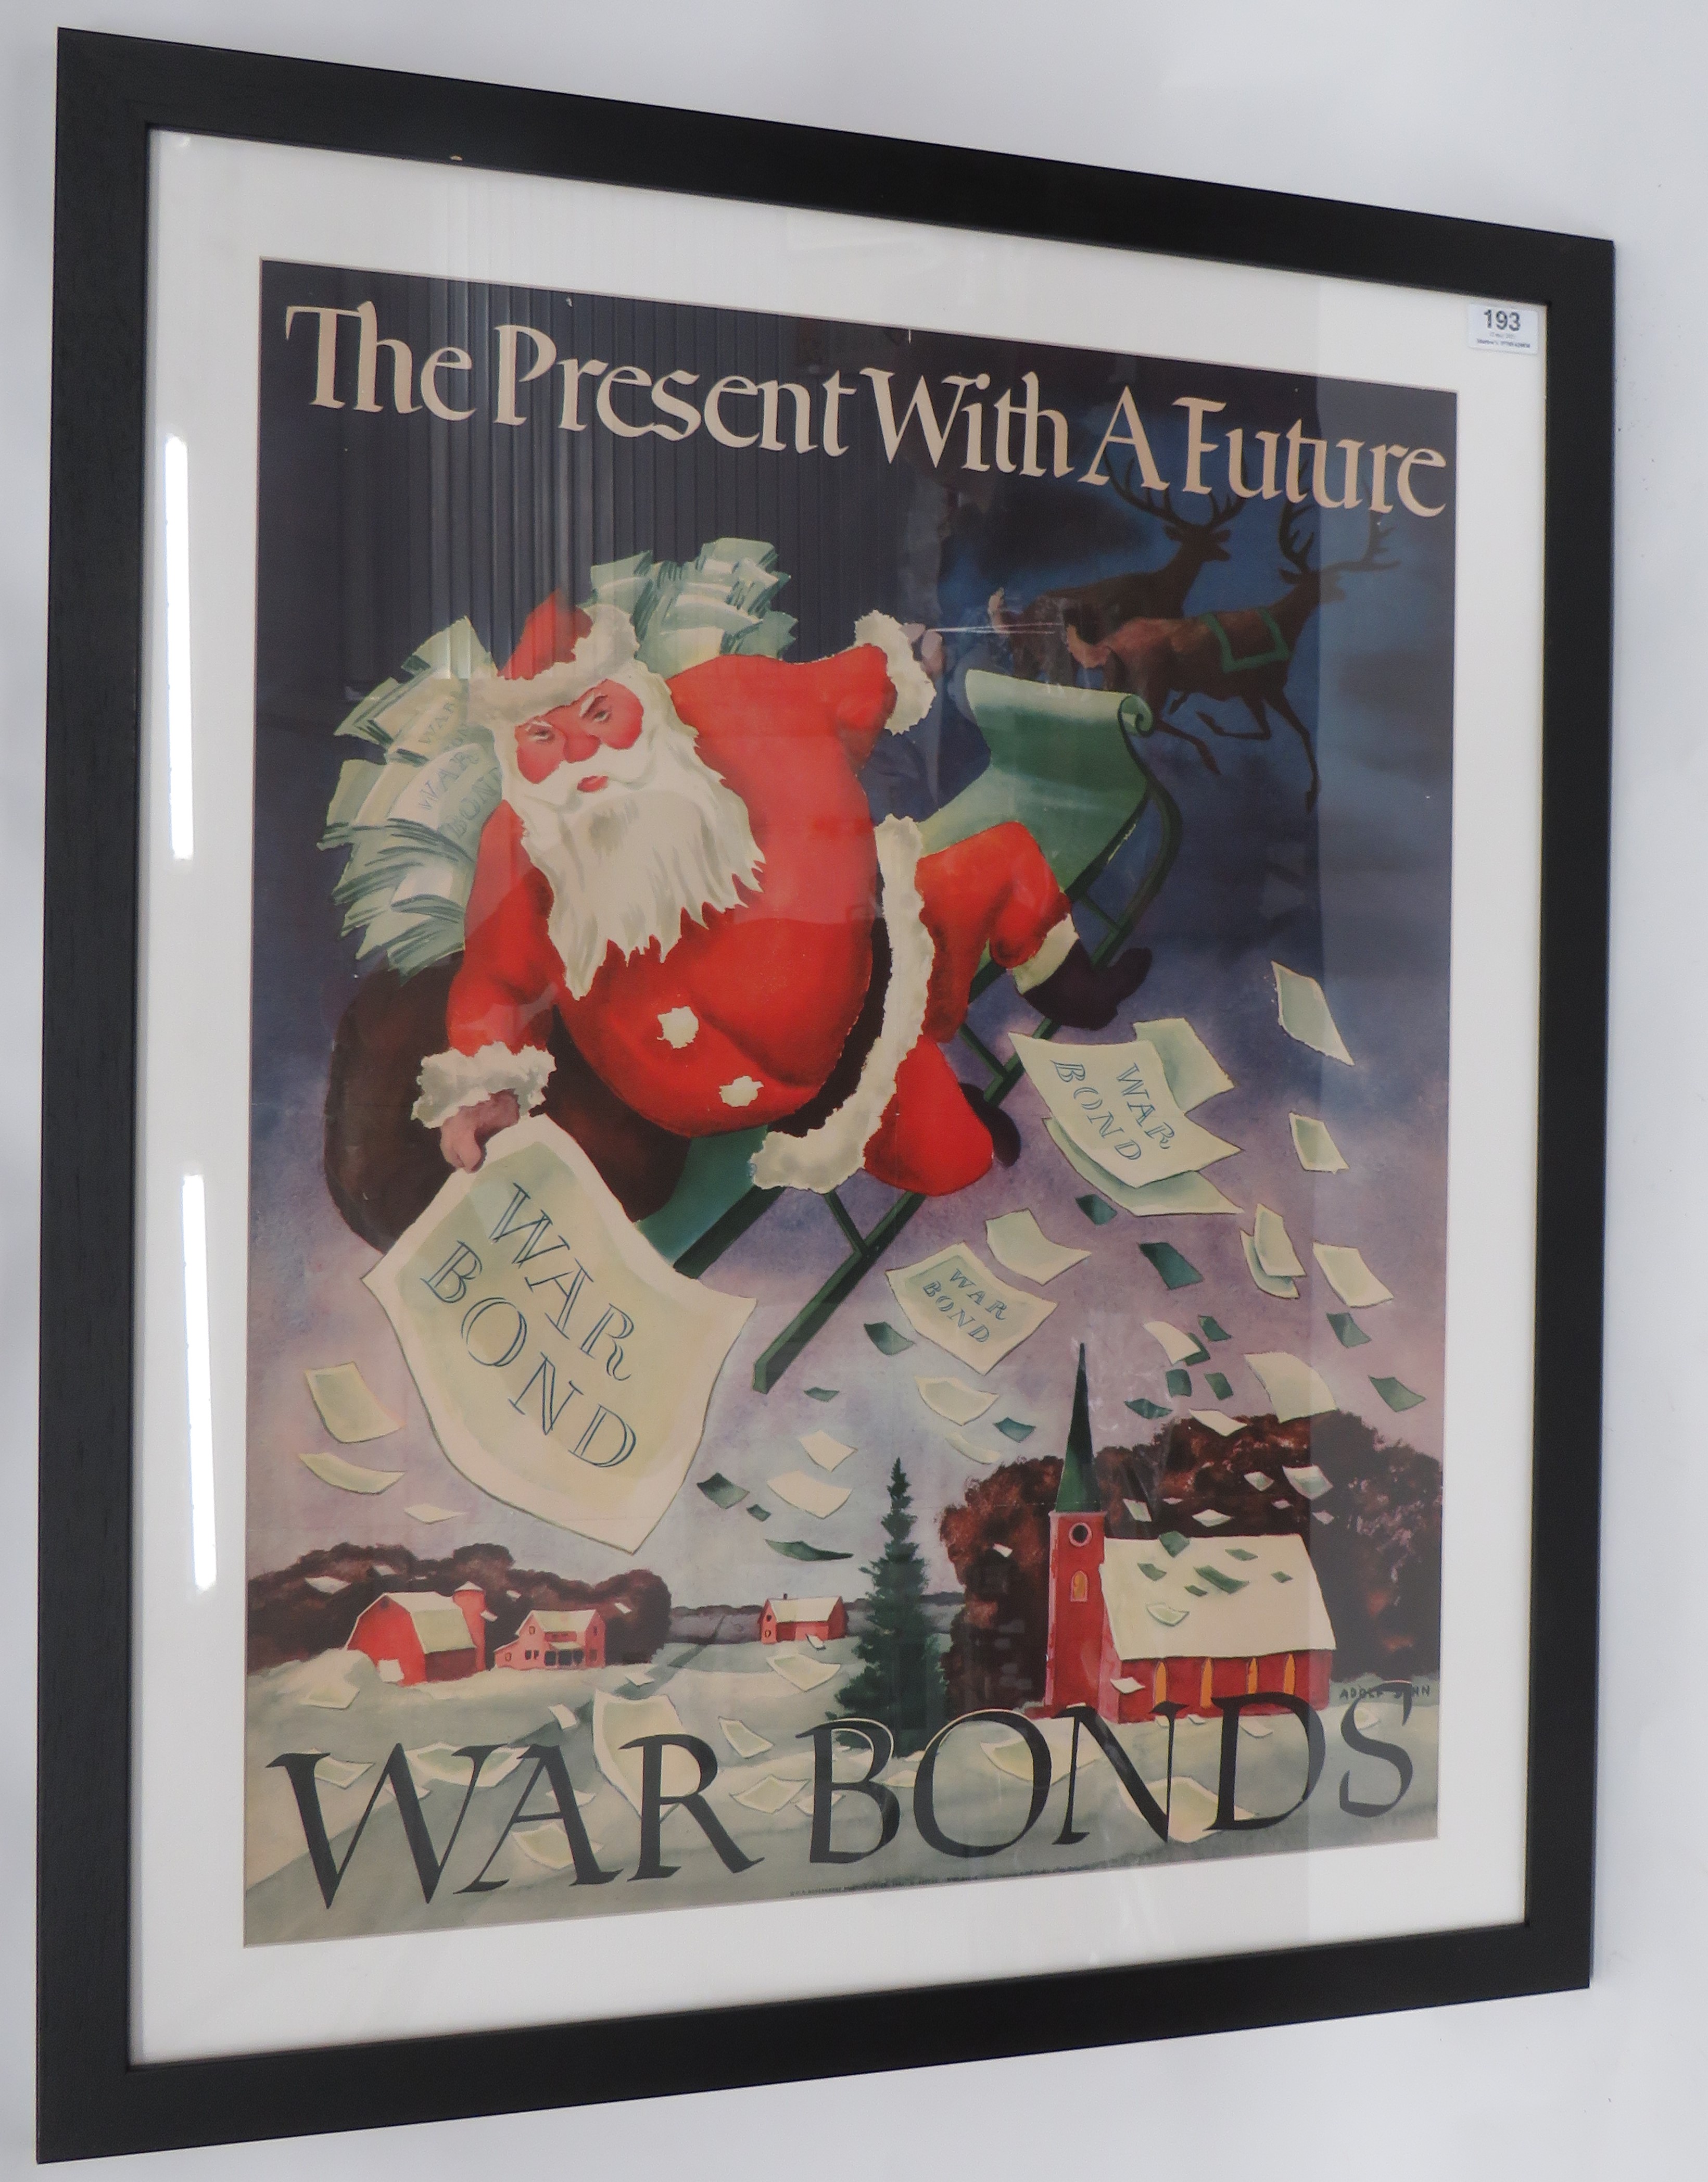 WW2 “War Bond” Christmas Poster colourful poster with text “The Present With A Future. War